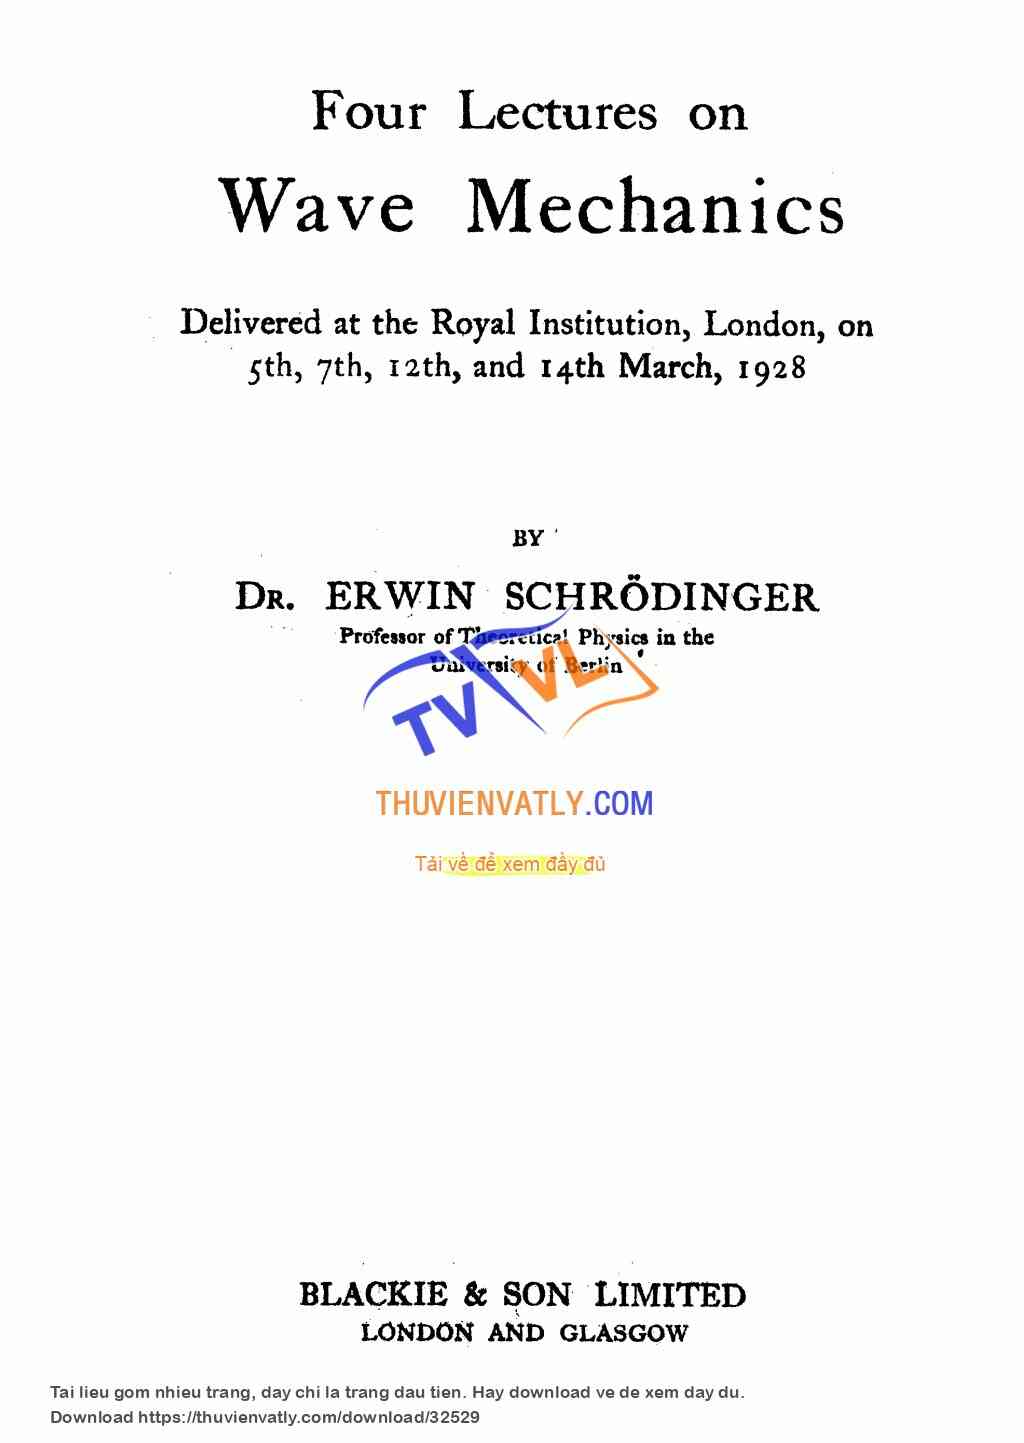 Four lectures on Wave mechanics by Erwin Shrodinger.